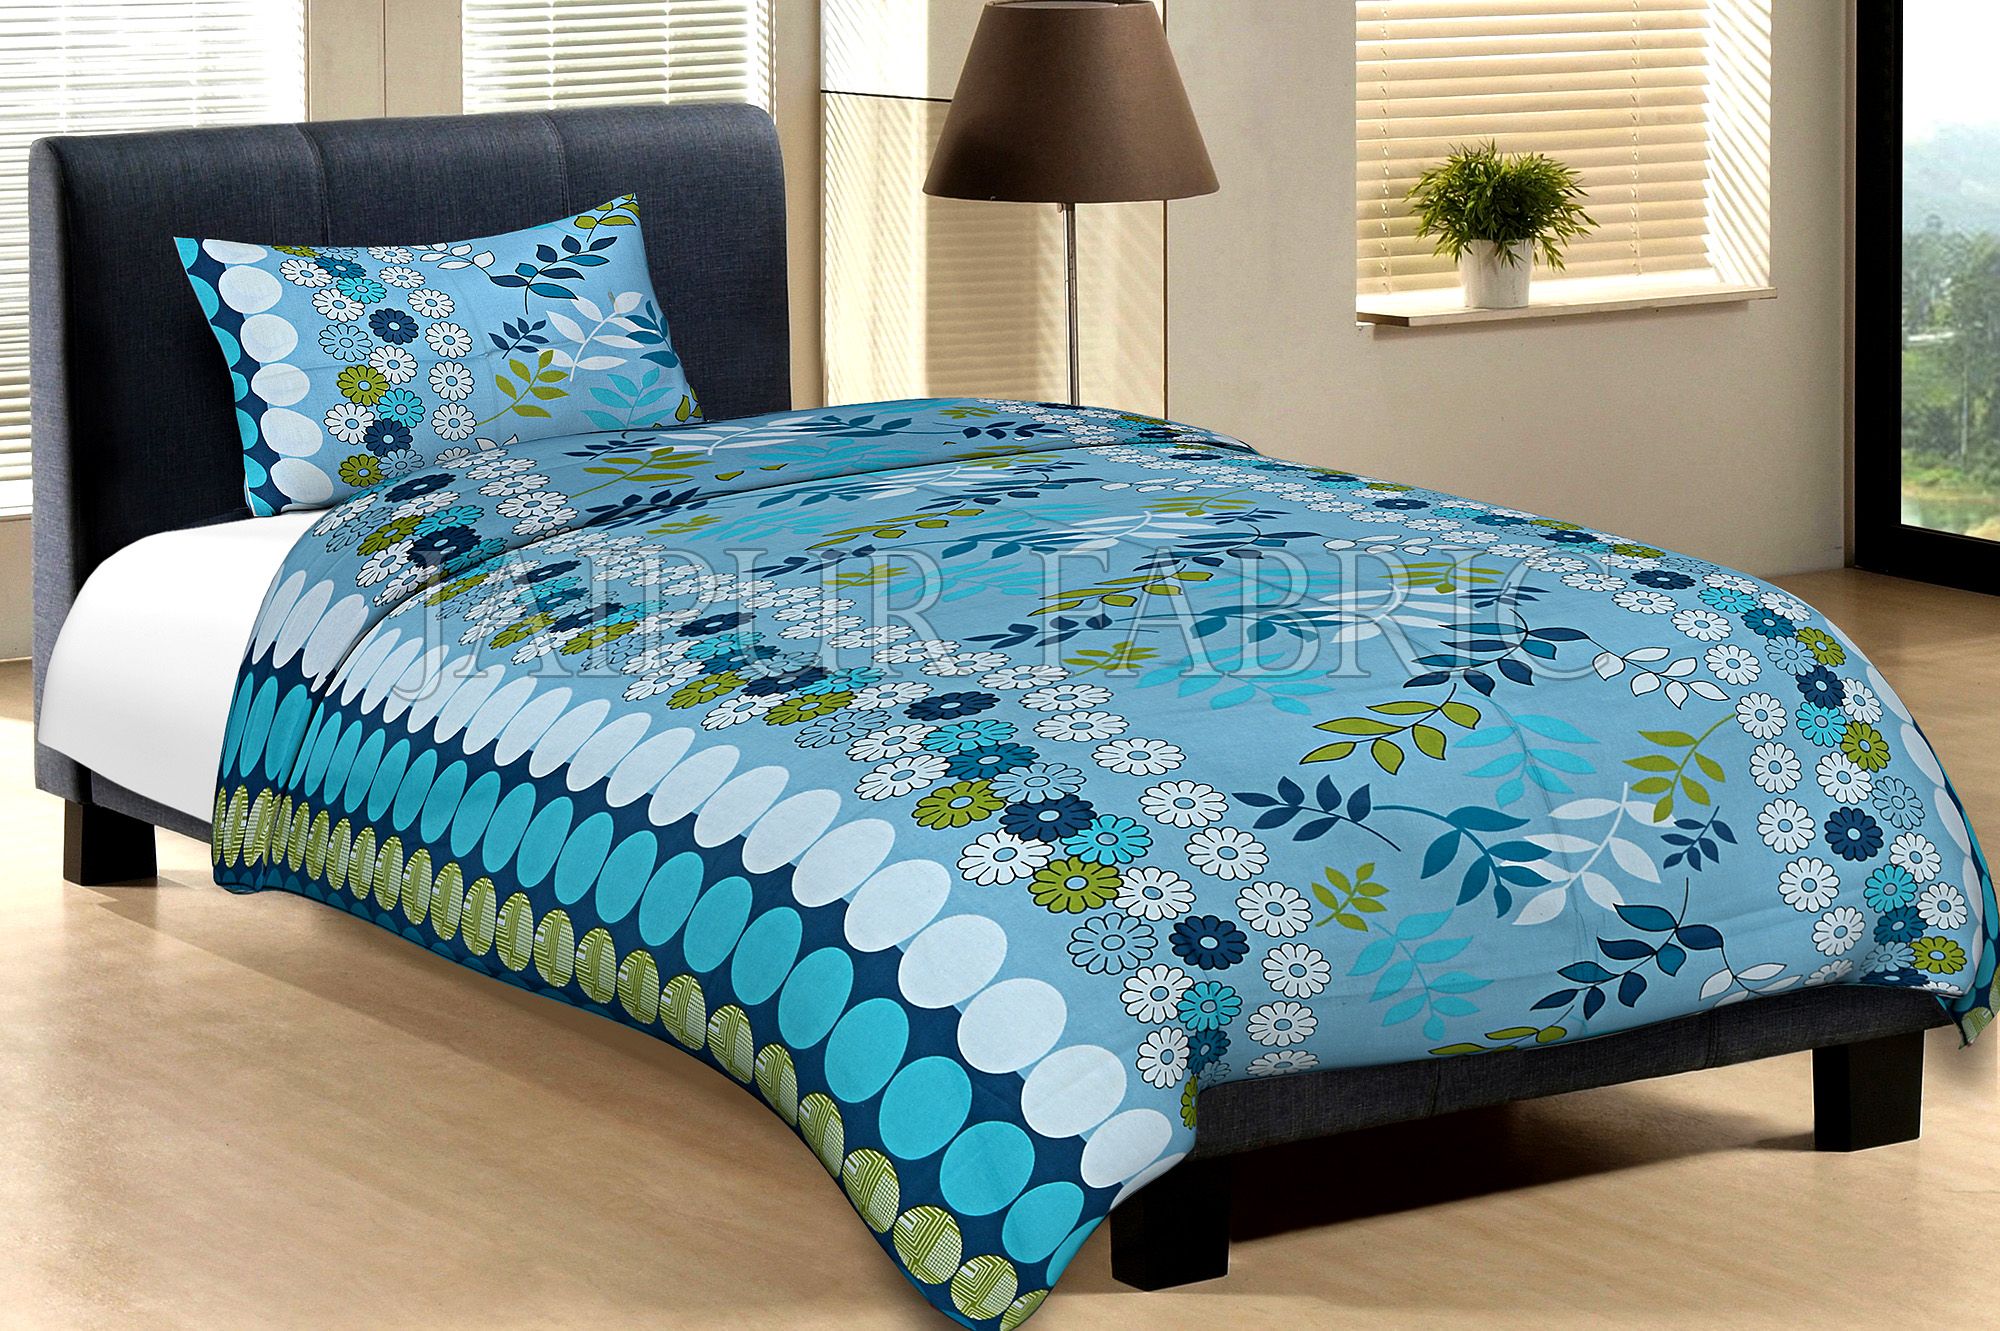 Blue Base Polka Dot Leaf And Flower Print Cotton Single Bed Sheet with 1 pillow Cover